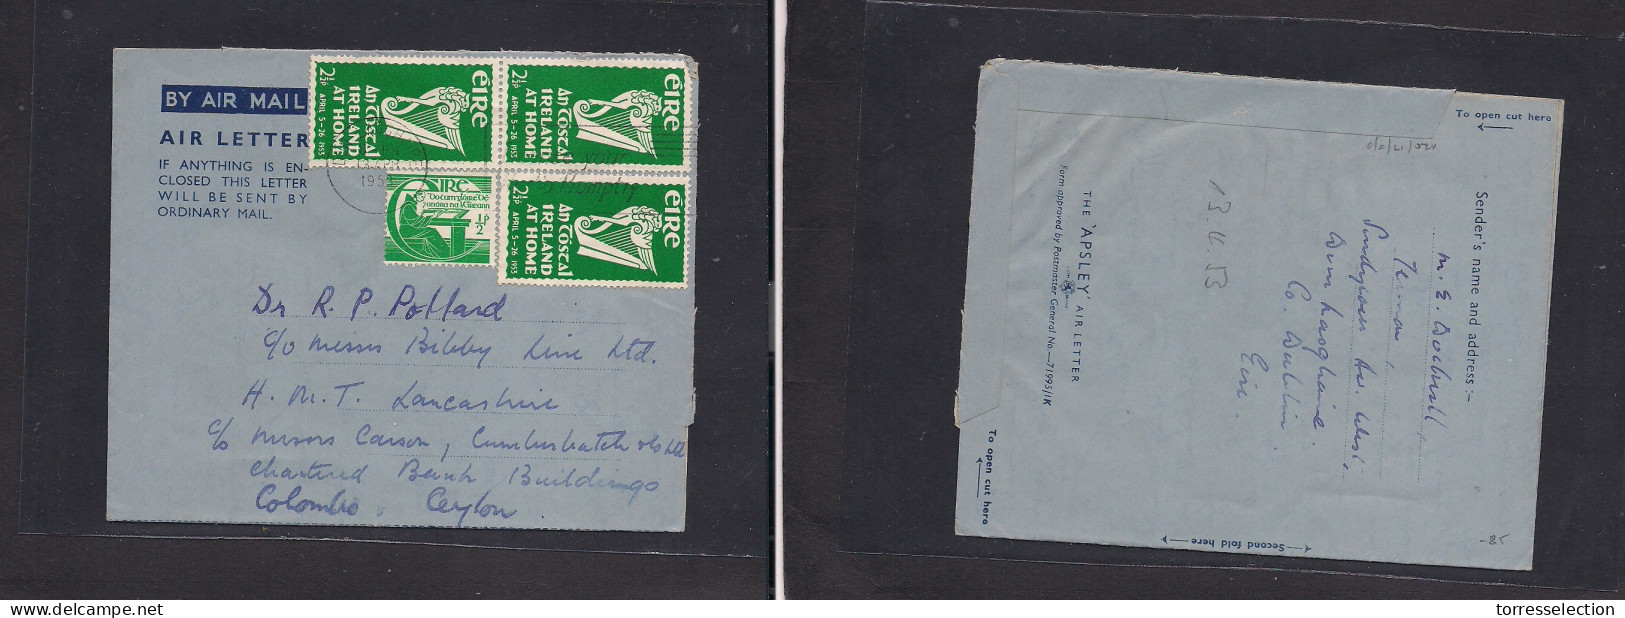 EIRE. 1953 (13 Apr) Haghainl - Ceylon, Colombo. Multifkd Airlettersheet, At 8p Rate, Rolling Cachet. Better Dest Usage.  - Usati